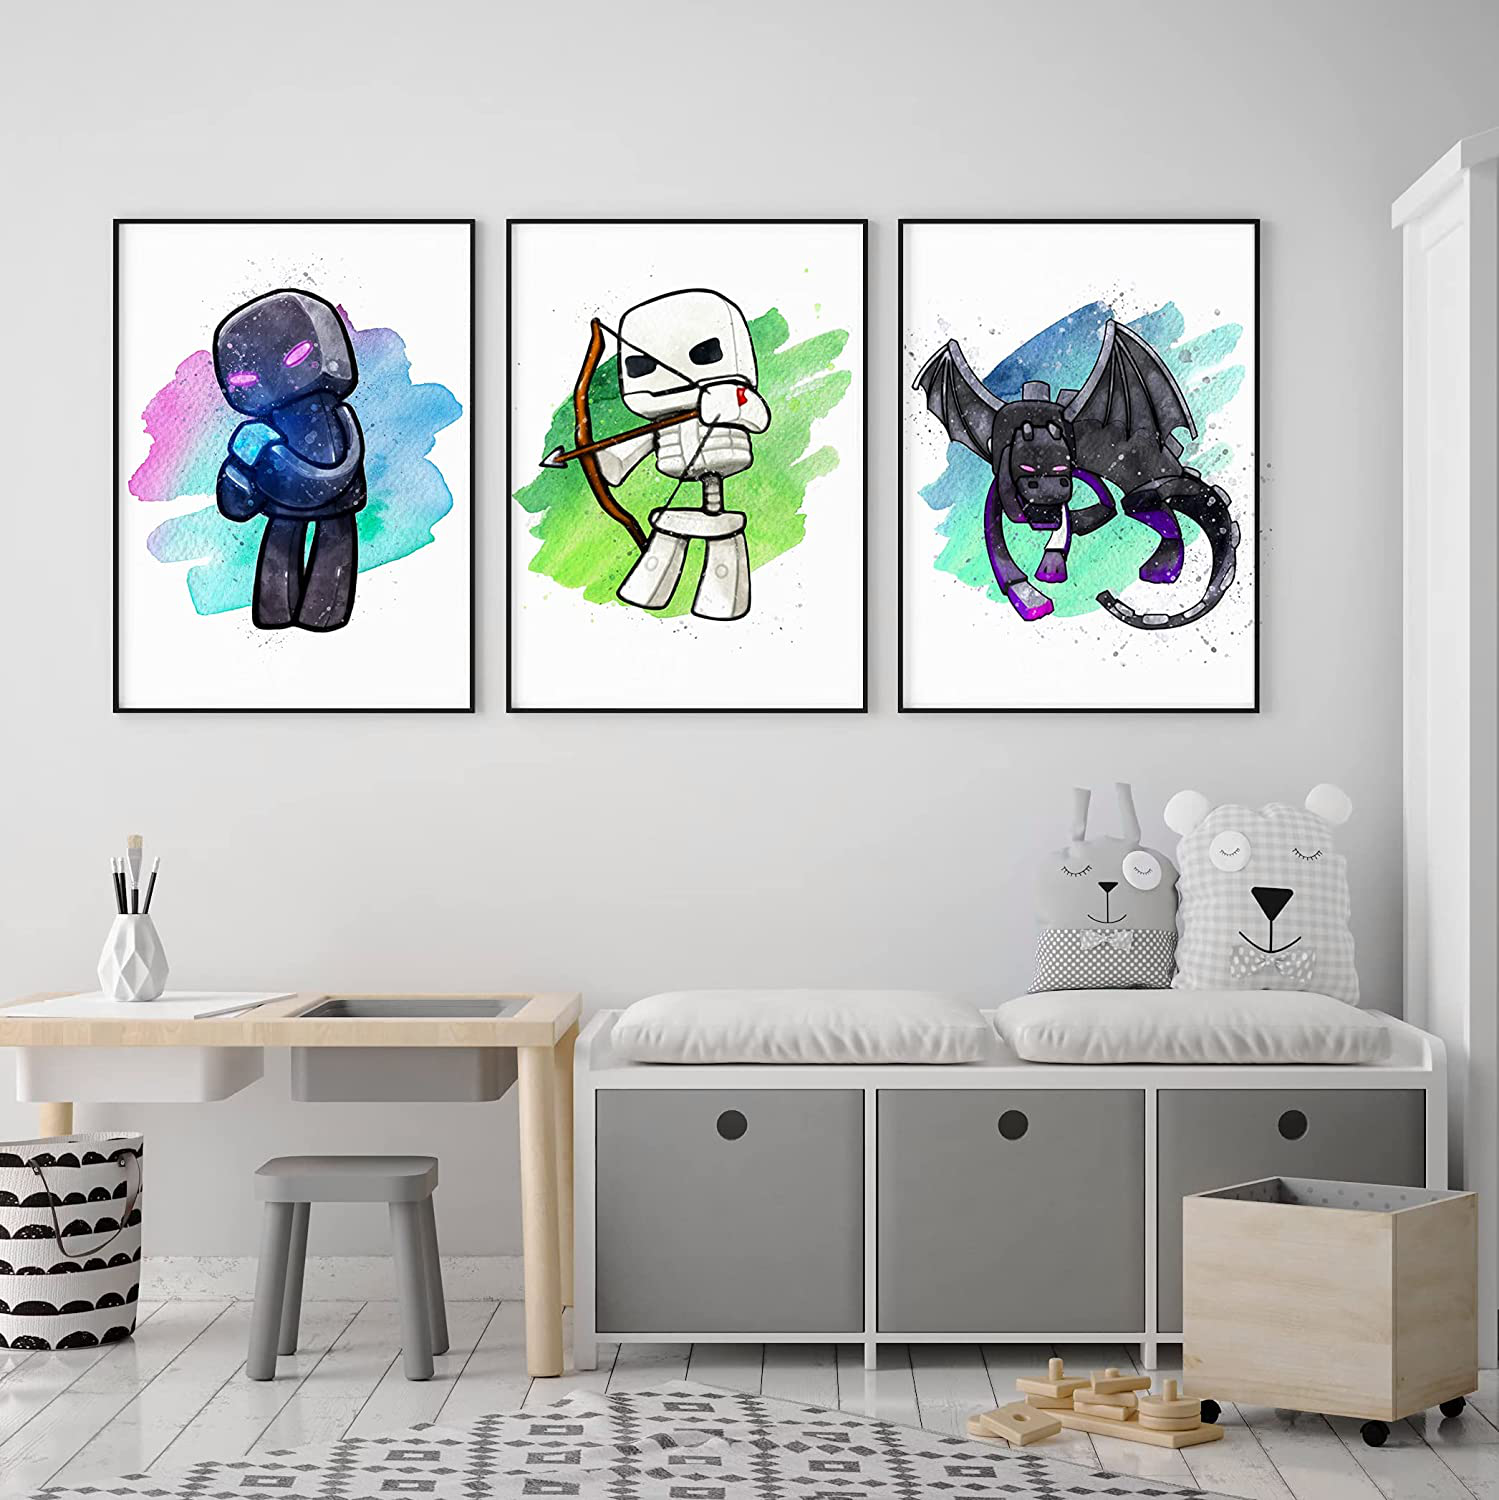 Miner Wall Poster Pixel Mine Posters for Boys Room – Mining Gamer Themed Wall Art Decor – Unframed Set of 6 Prints, 8x10 Inch, Unique Watercolor Painted Gaming Wall Art Room Decor for Boys, Teens, Kids Bedroom, Game Room, Playroom, Teen Room Decor